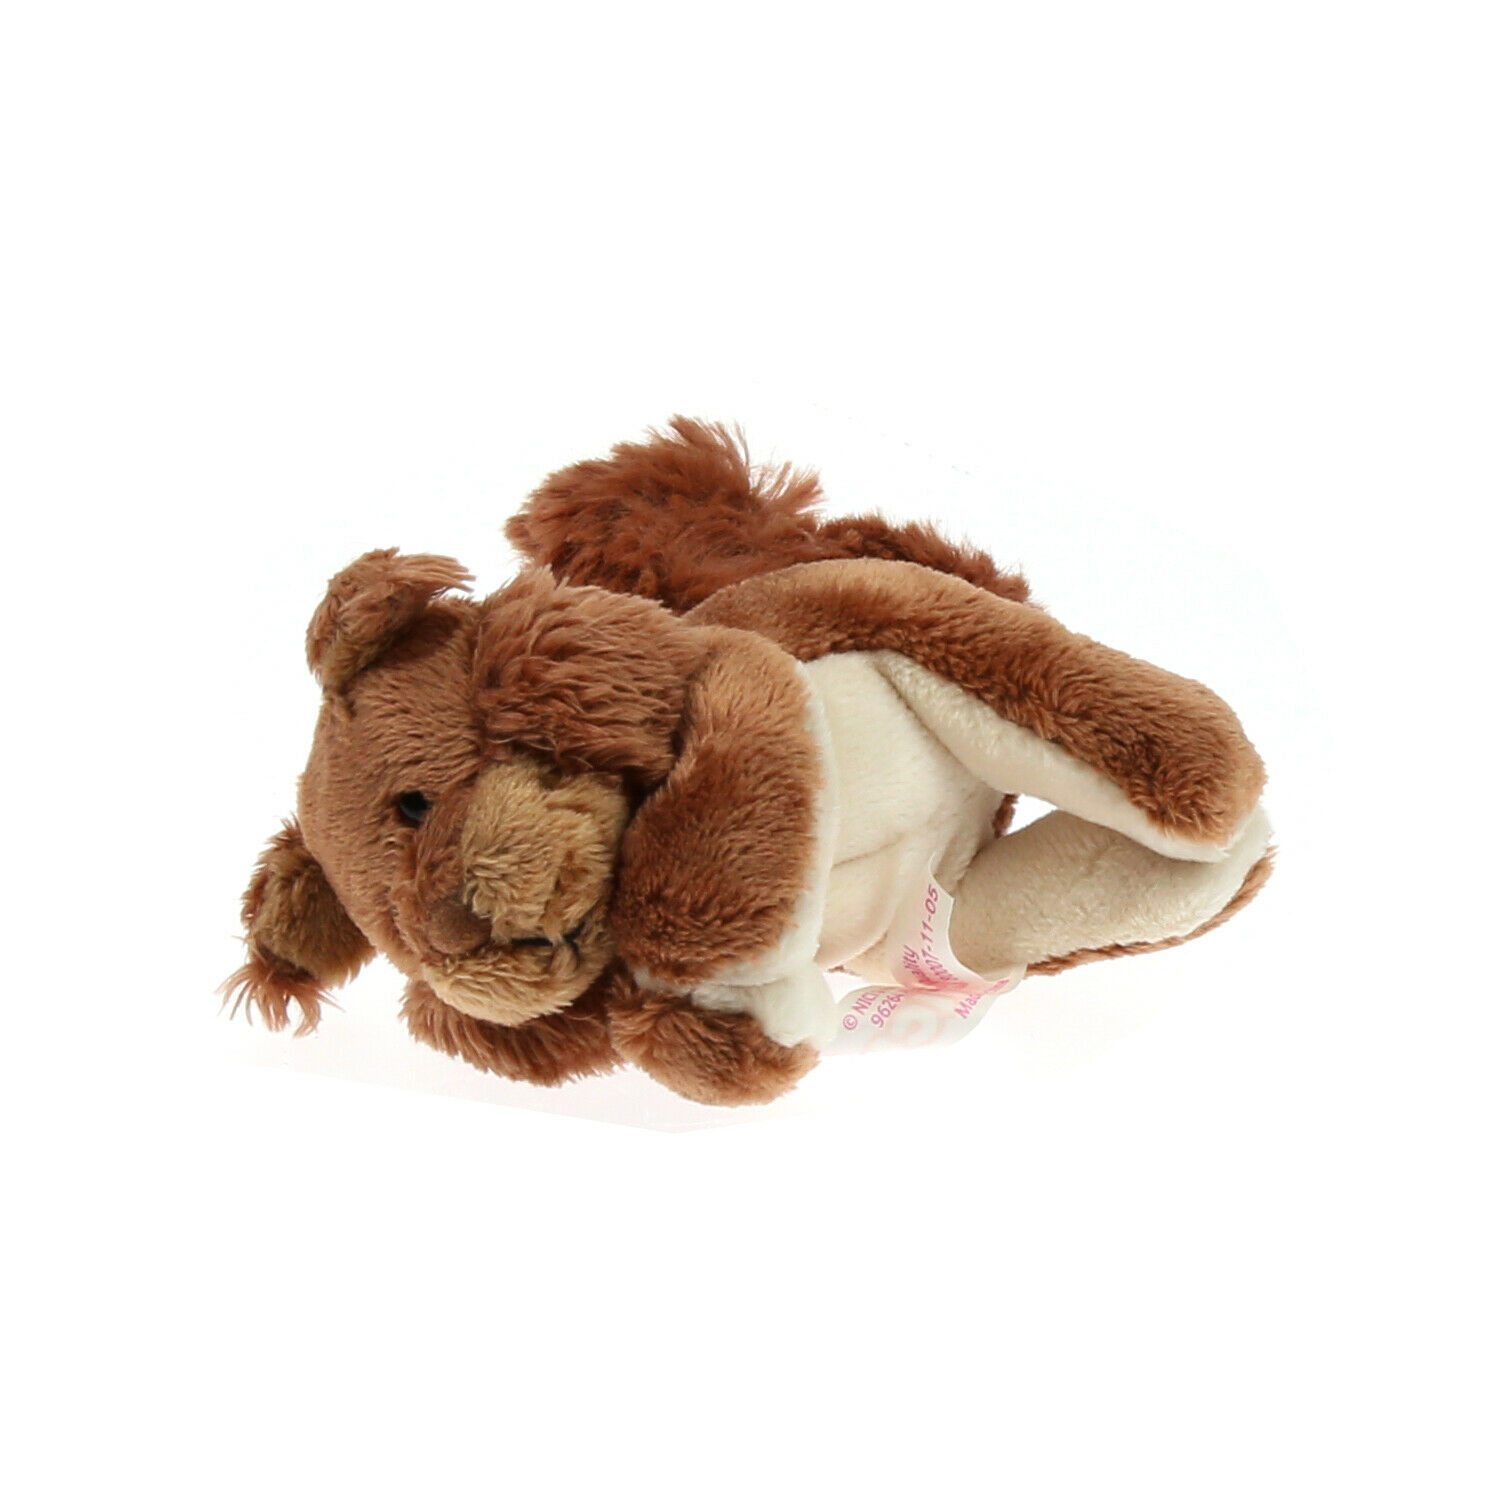 MagNICI Squirrel Brown Stuffed Toy Animal Magnet in Paws 5 inches 